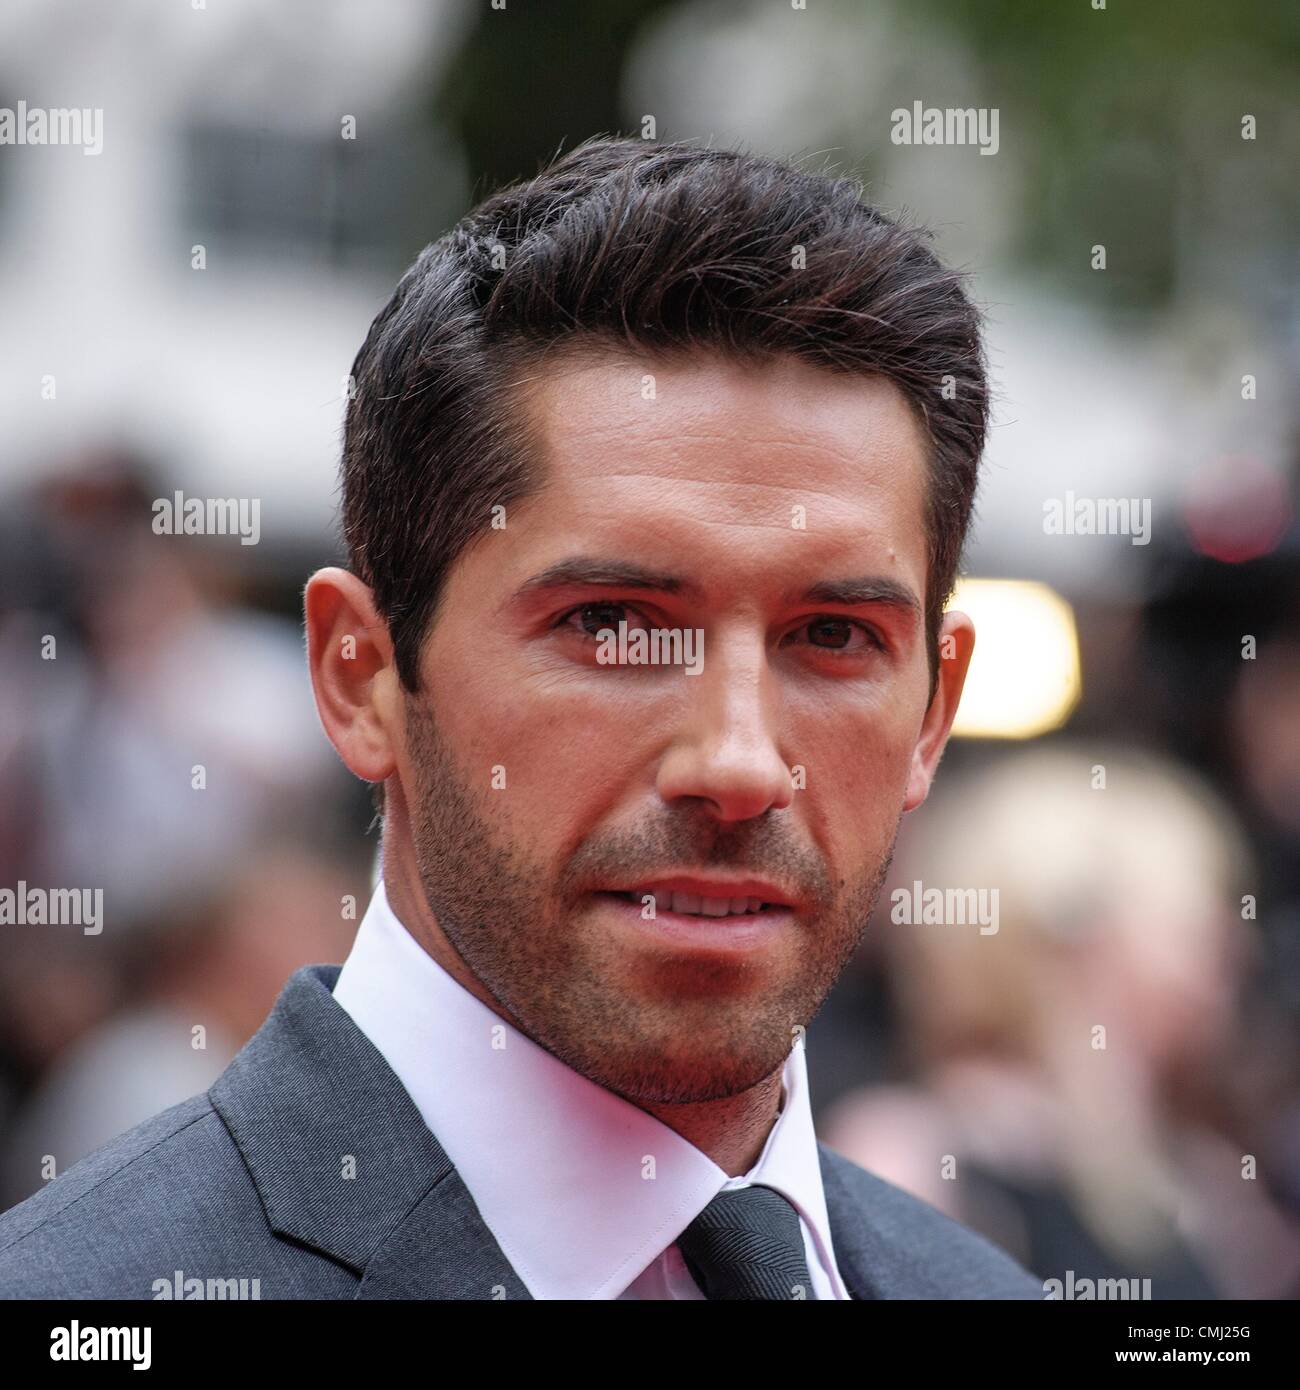 13th Aug 2012. Scott Adkins attends UK Premiere of the film Expendables 2 on 13/08/2012 at The Empire Leicester Square, London. Persons pictured: Scott Adkins . Picture by Julie Edward Credit:  JEP Celebrity Photos / Alamy Live News Stock Photo